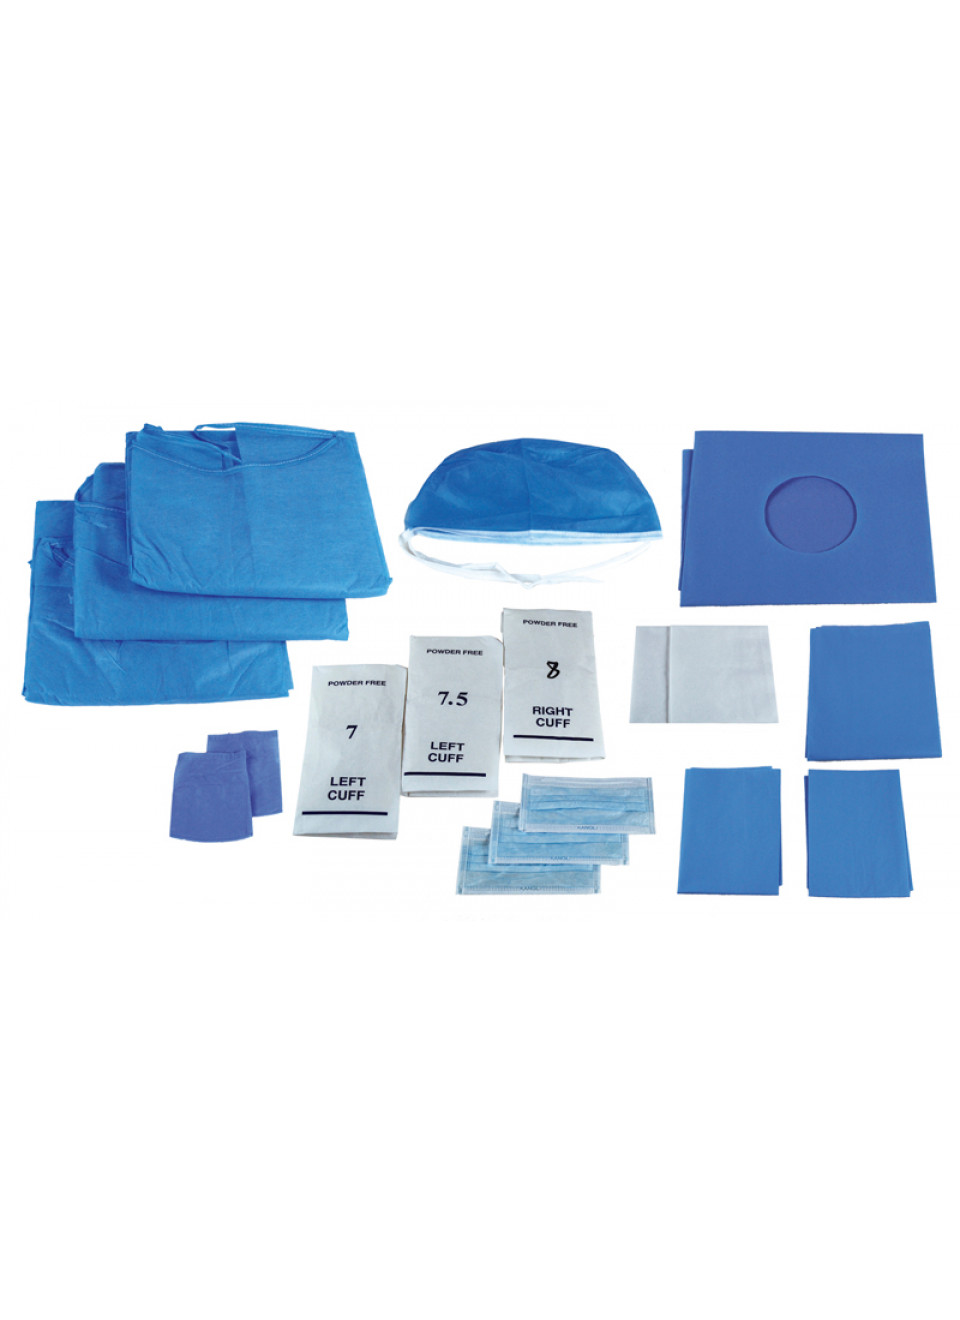  Create your own sterile clinic set